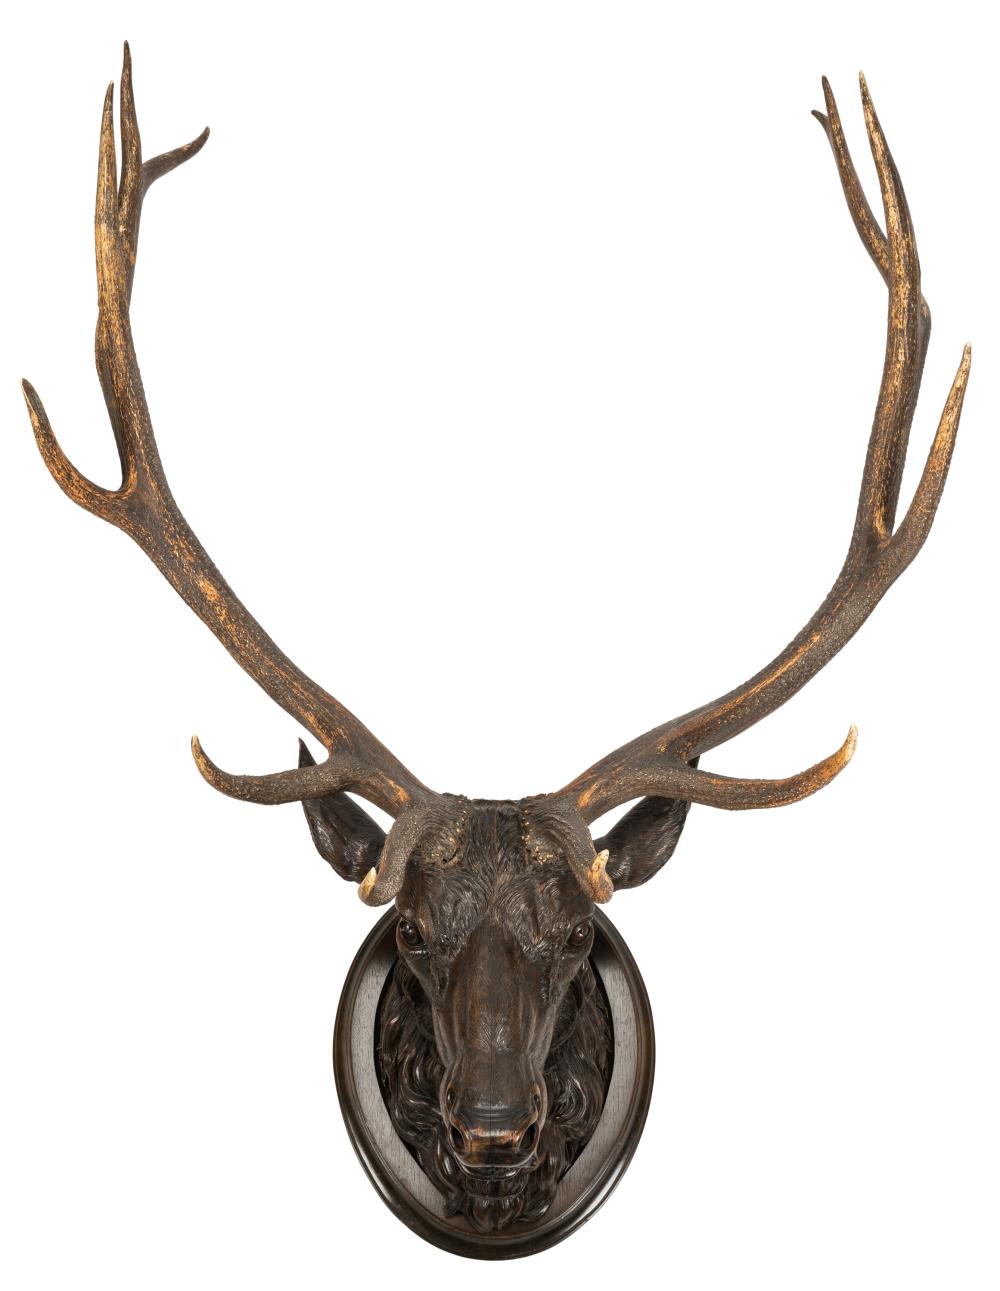 GERMAN CARVED WOOD STAG BUSTwith 331db9